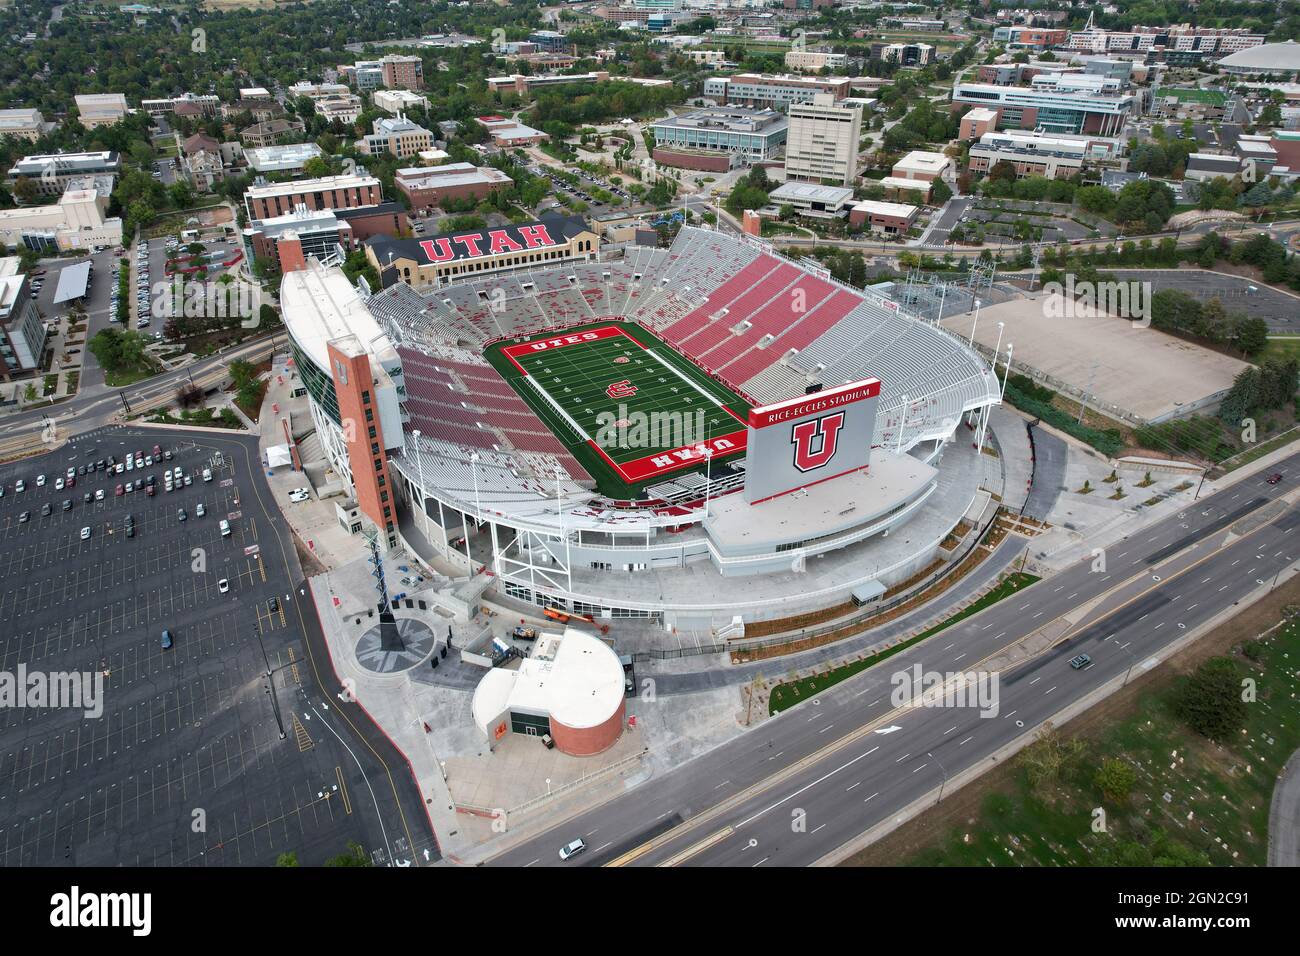 An Aerial View Of Rice Eccles Stadium On The Campus Of The University Of Utah Sunday Sept 5 2021 In Salt Lake City The Stadium Is The Home Of Th Stock Photo Alamy